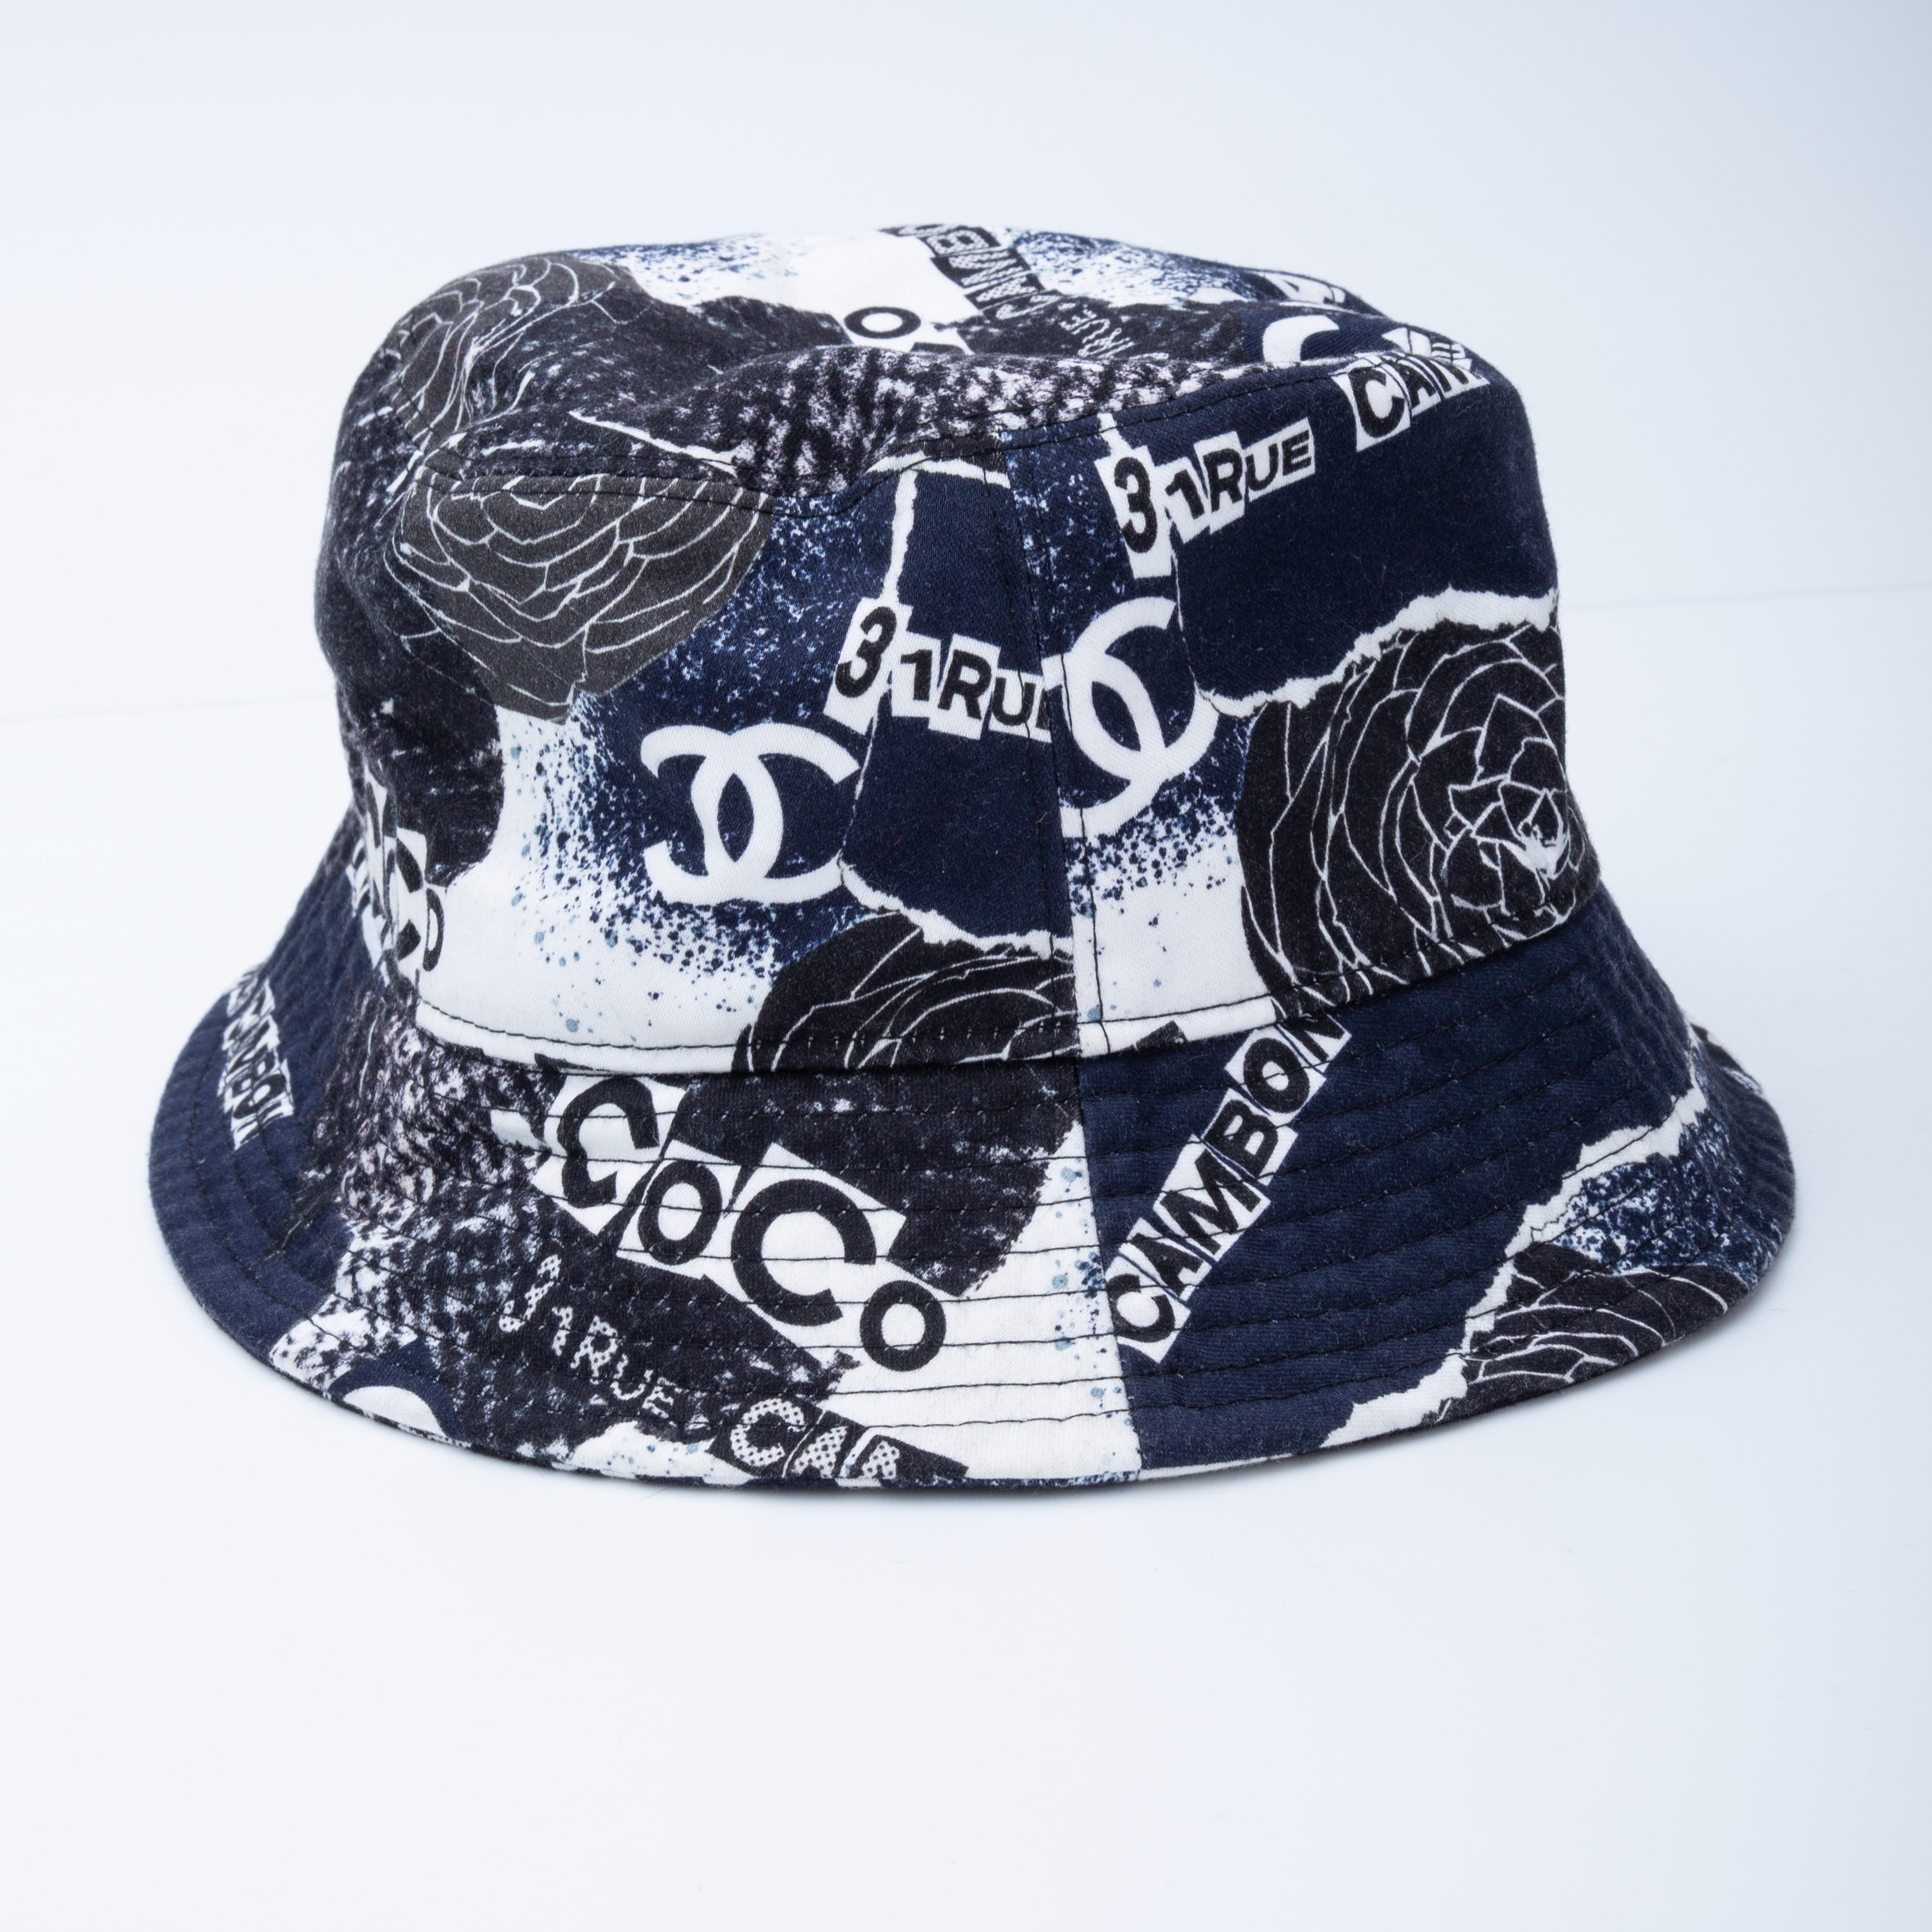 chanel bucket hat black and white